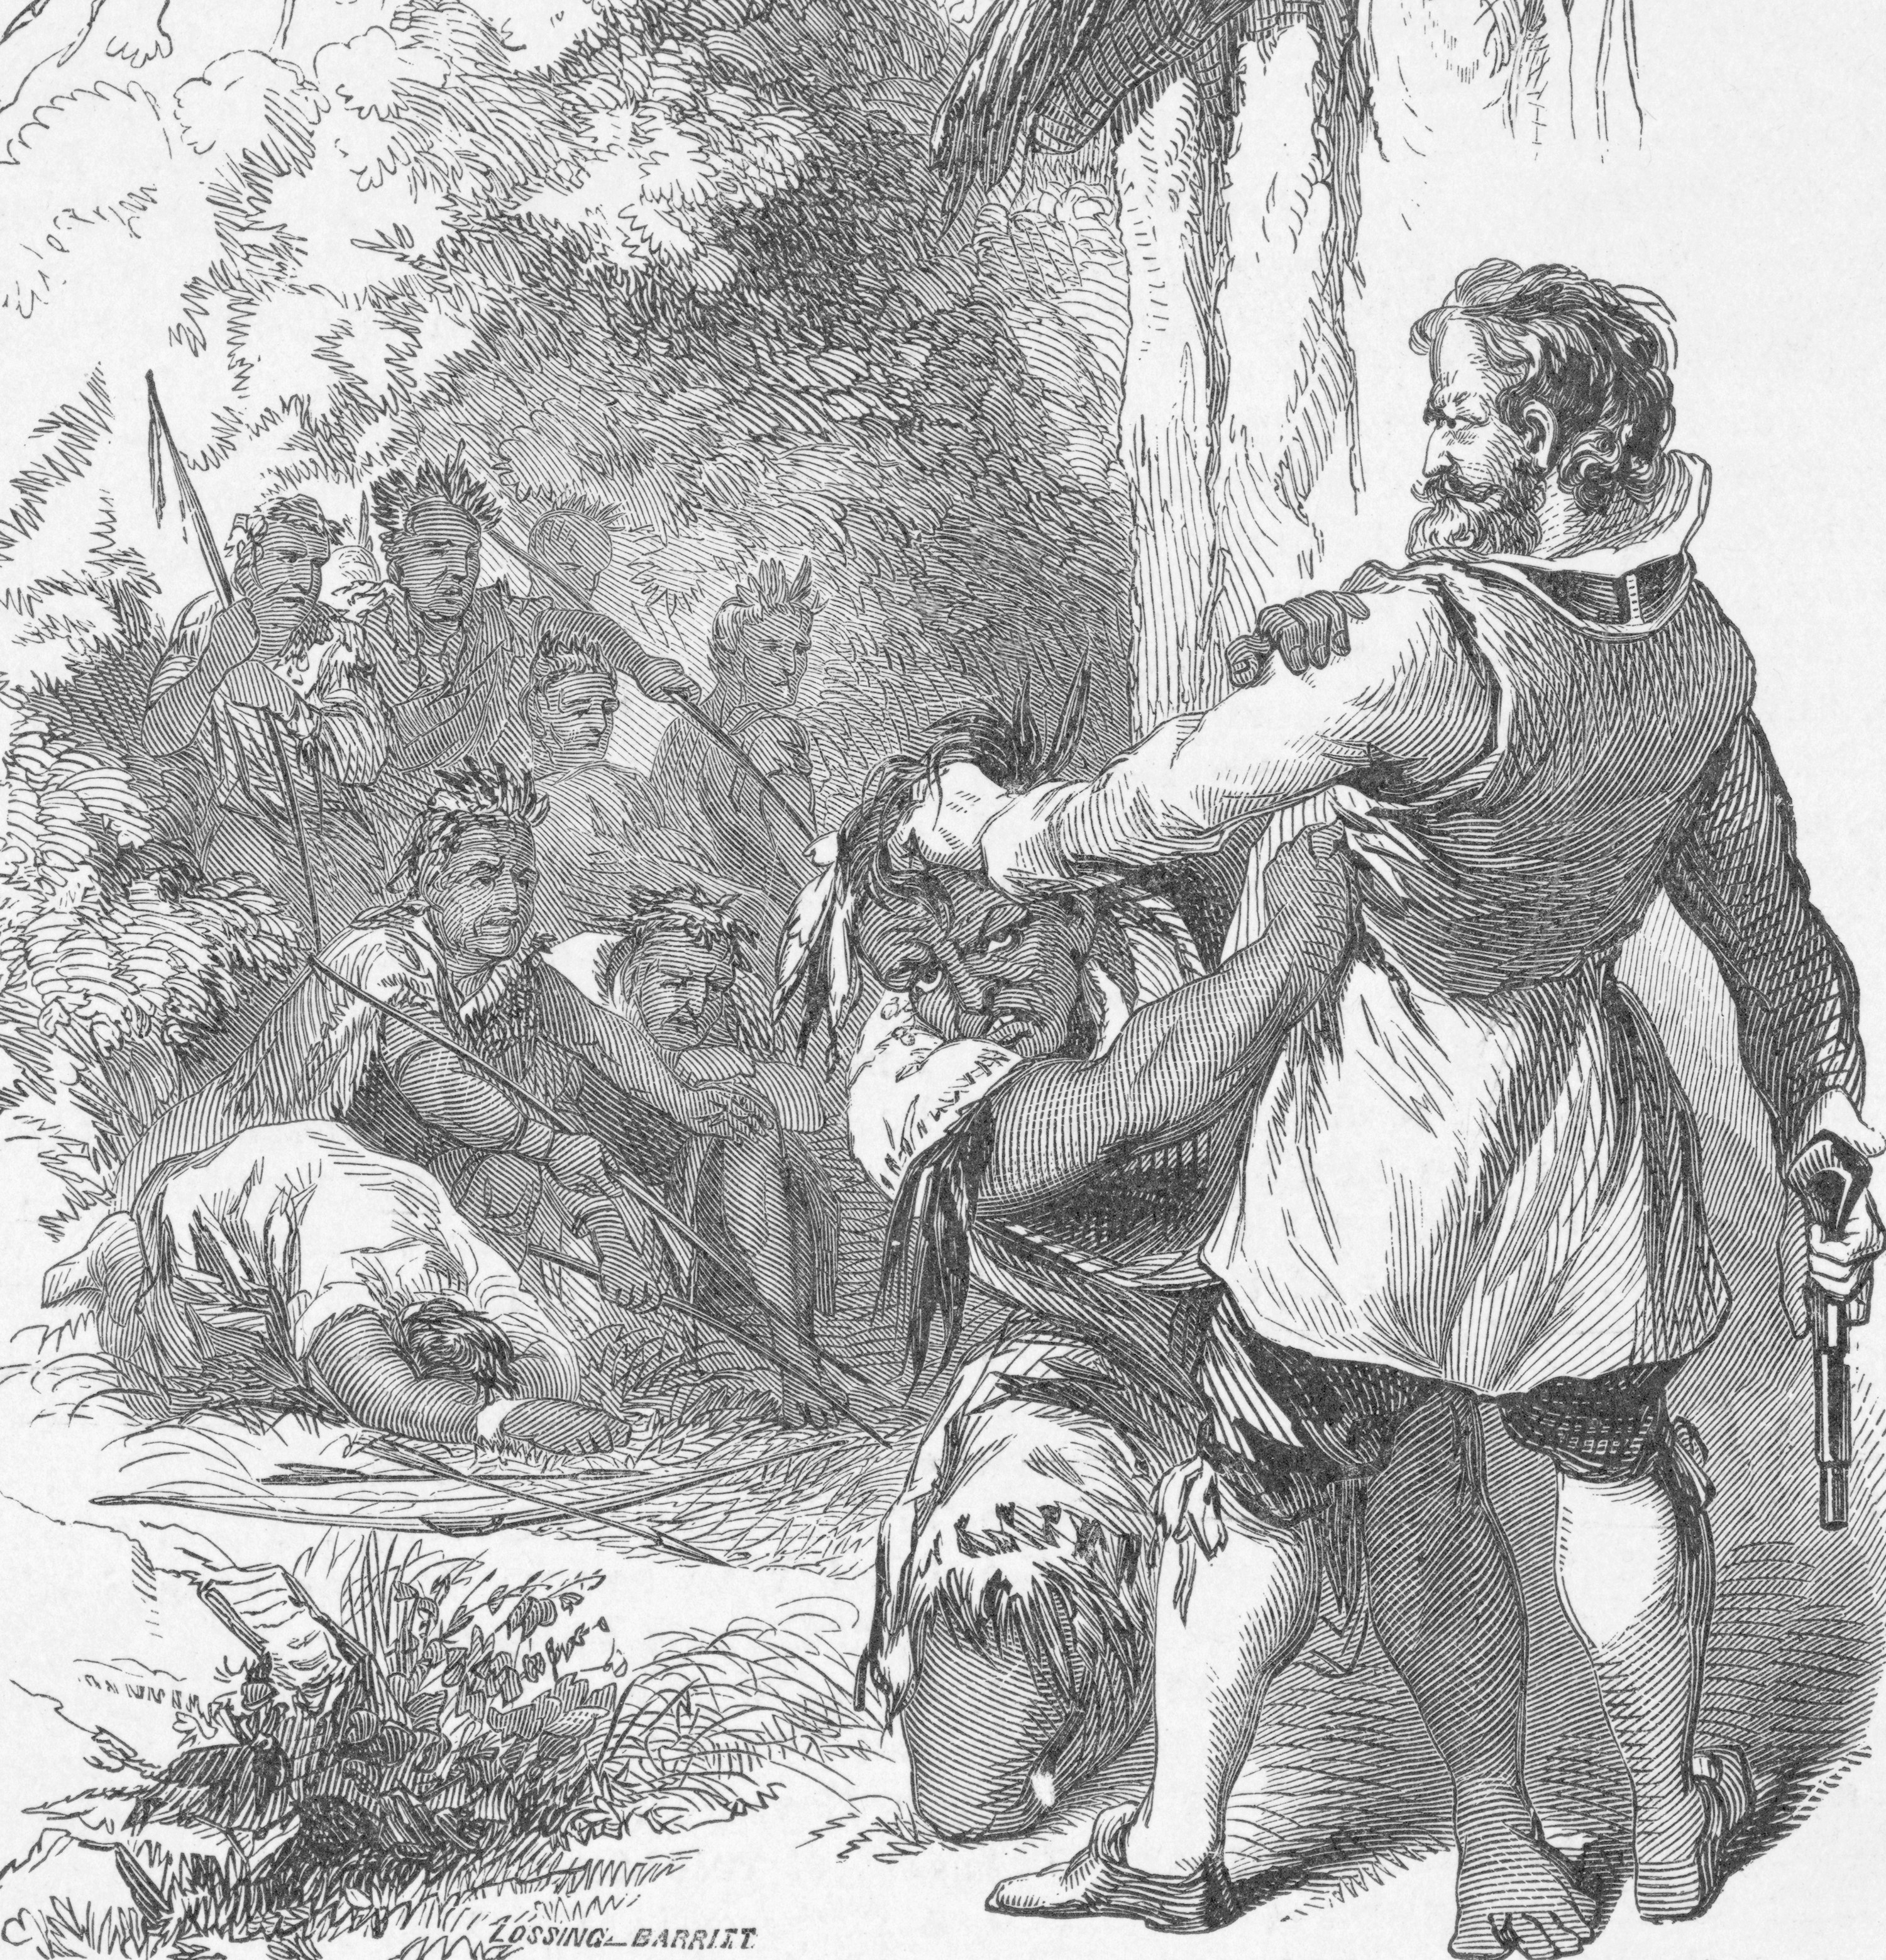 Illustration of Captain John Smith subduing the Indian Chief Powhatan